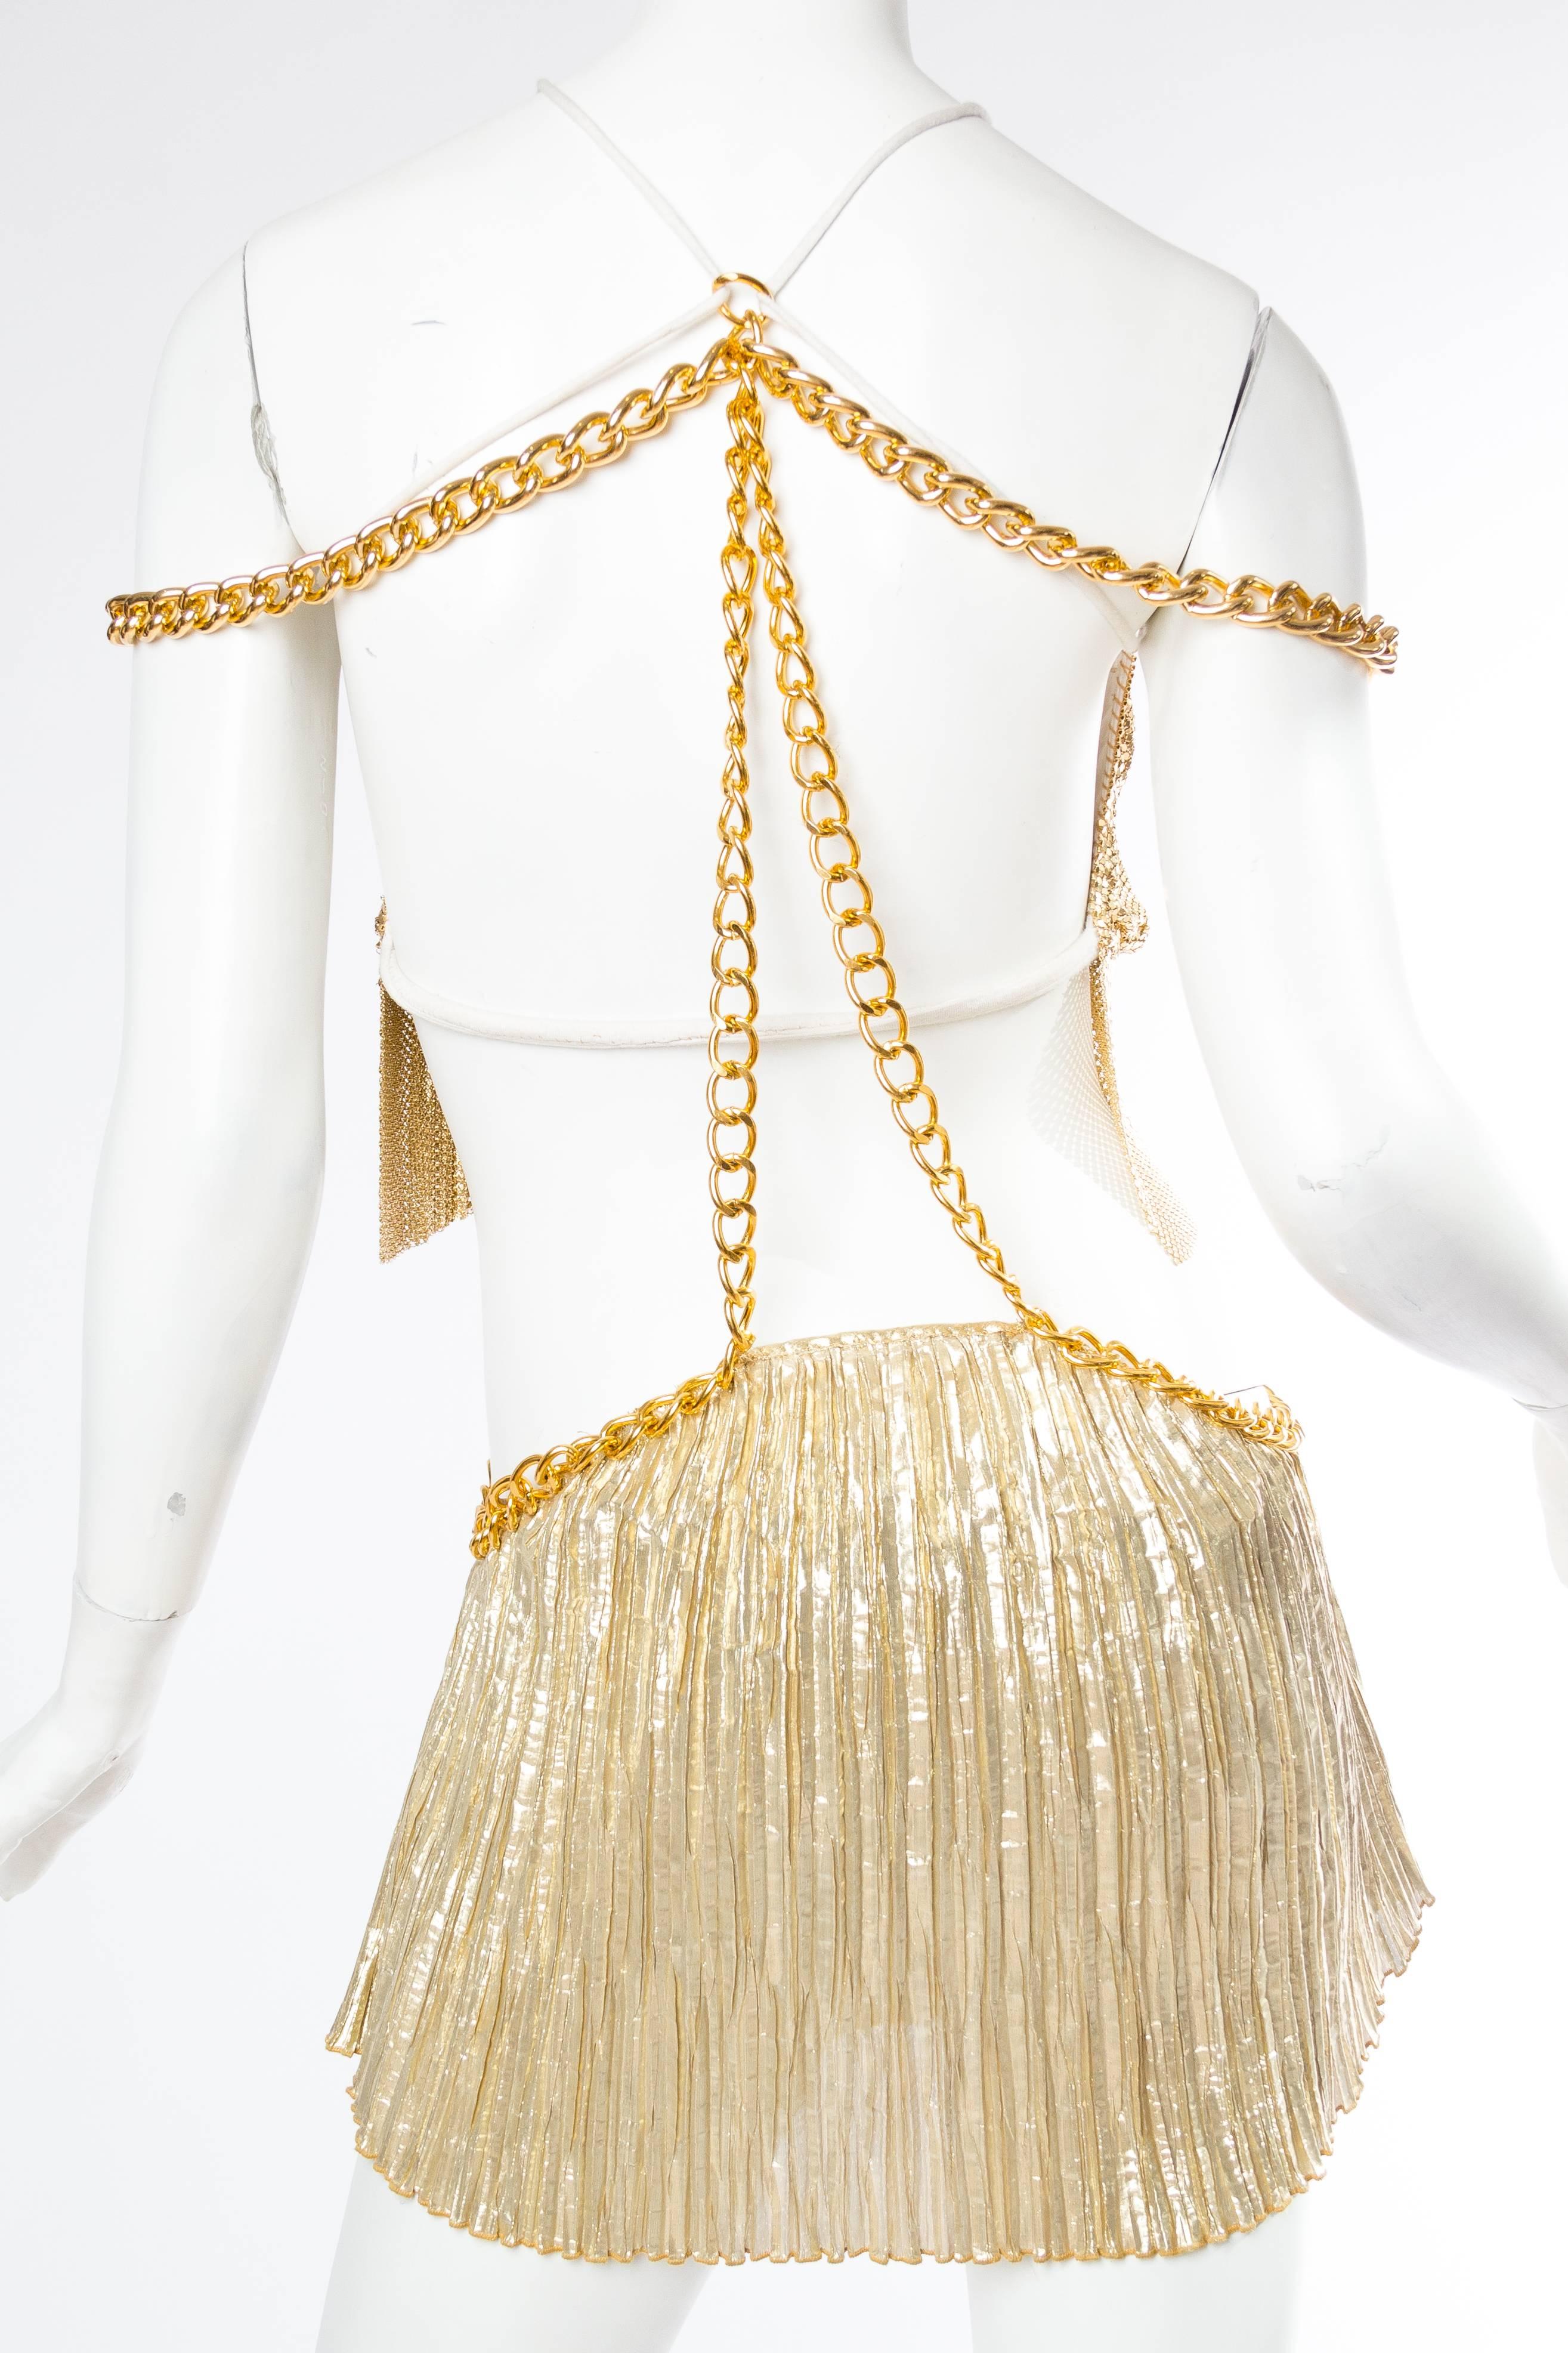 Gold Metal-Mesh and Chain Showgirl Dream Dress 3